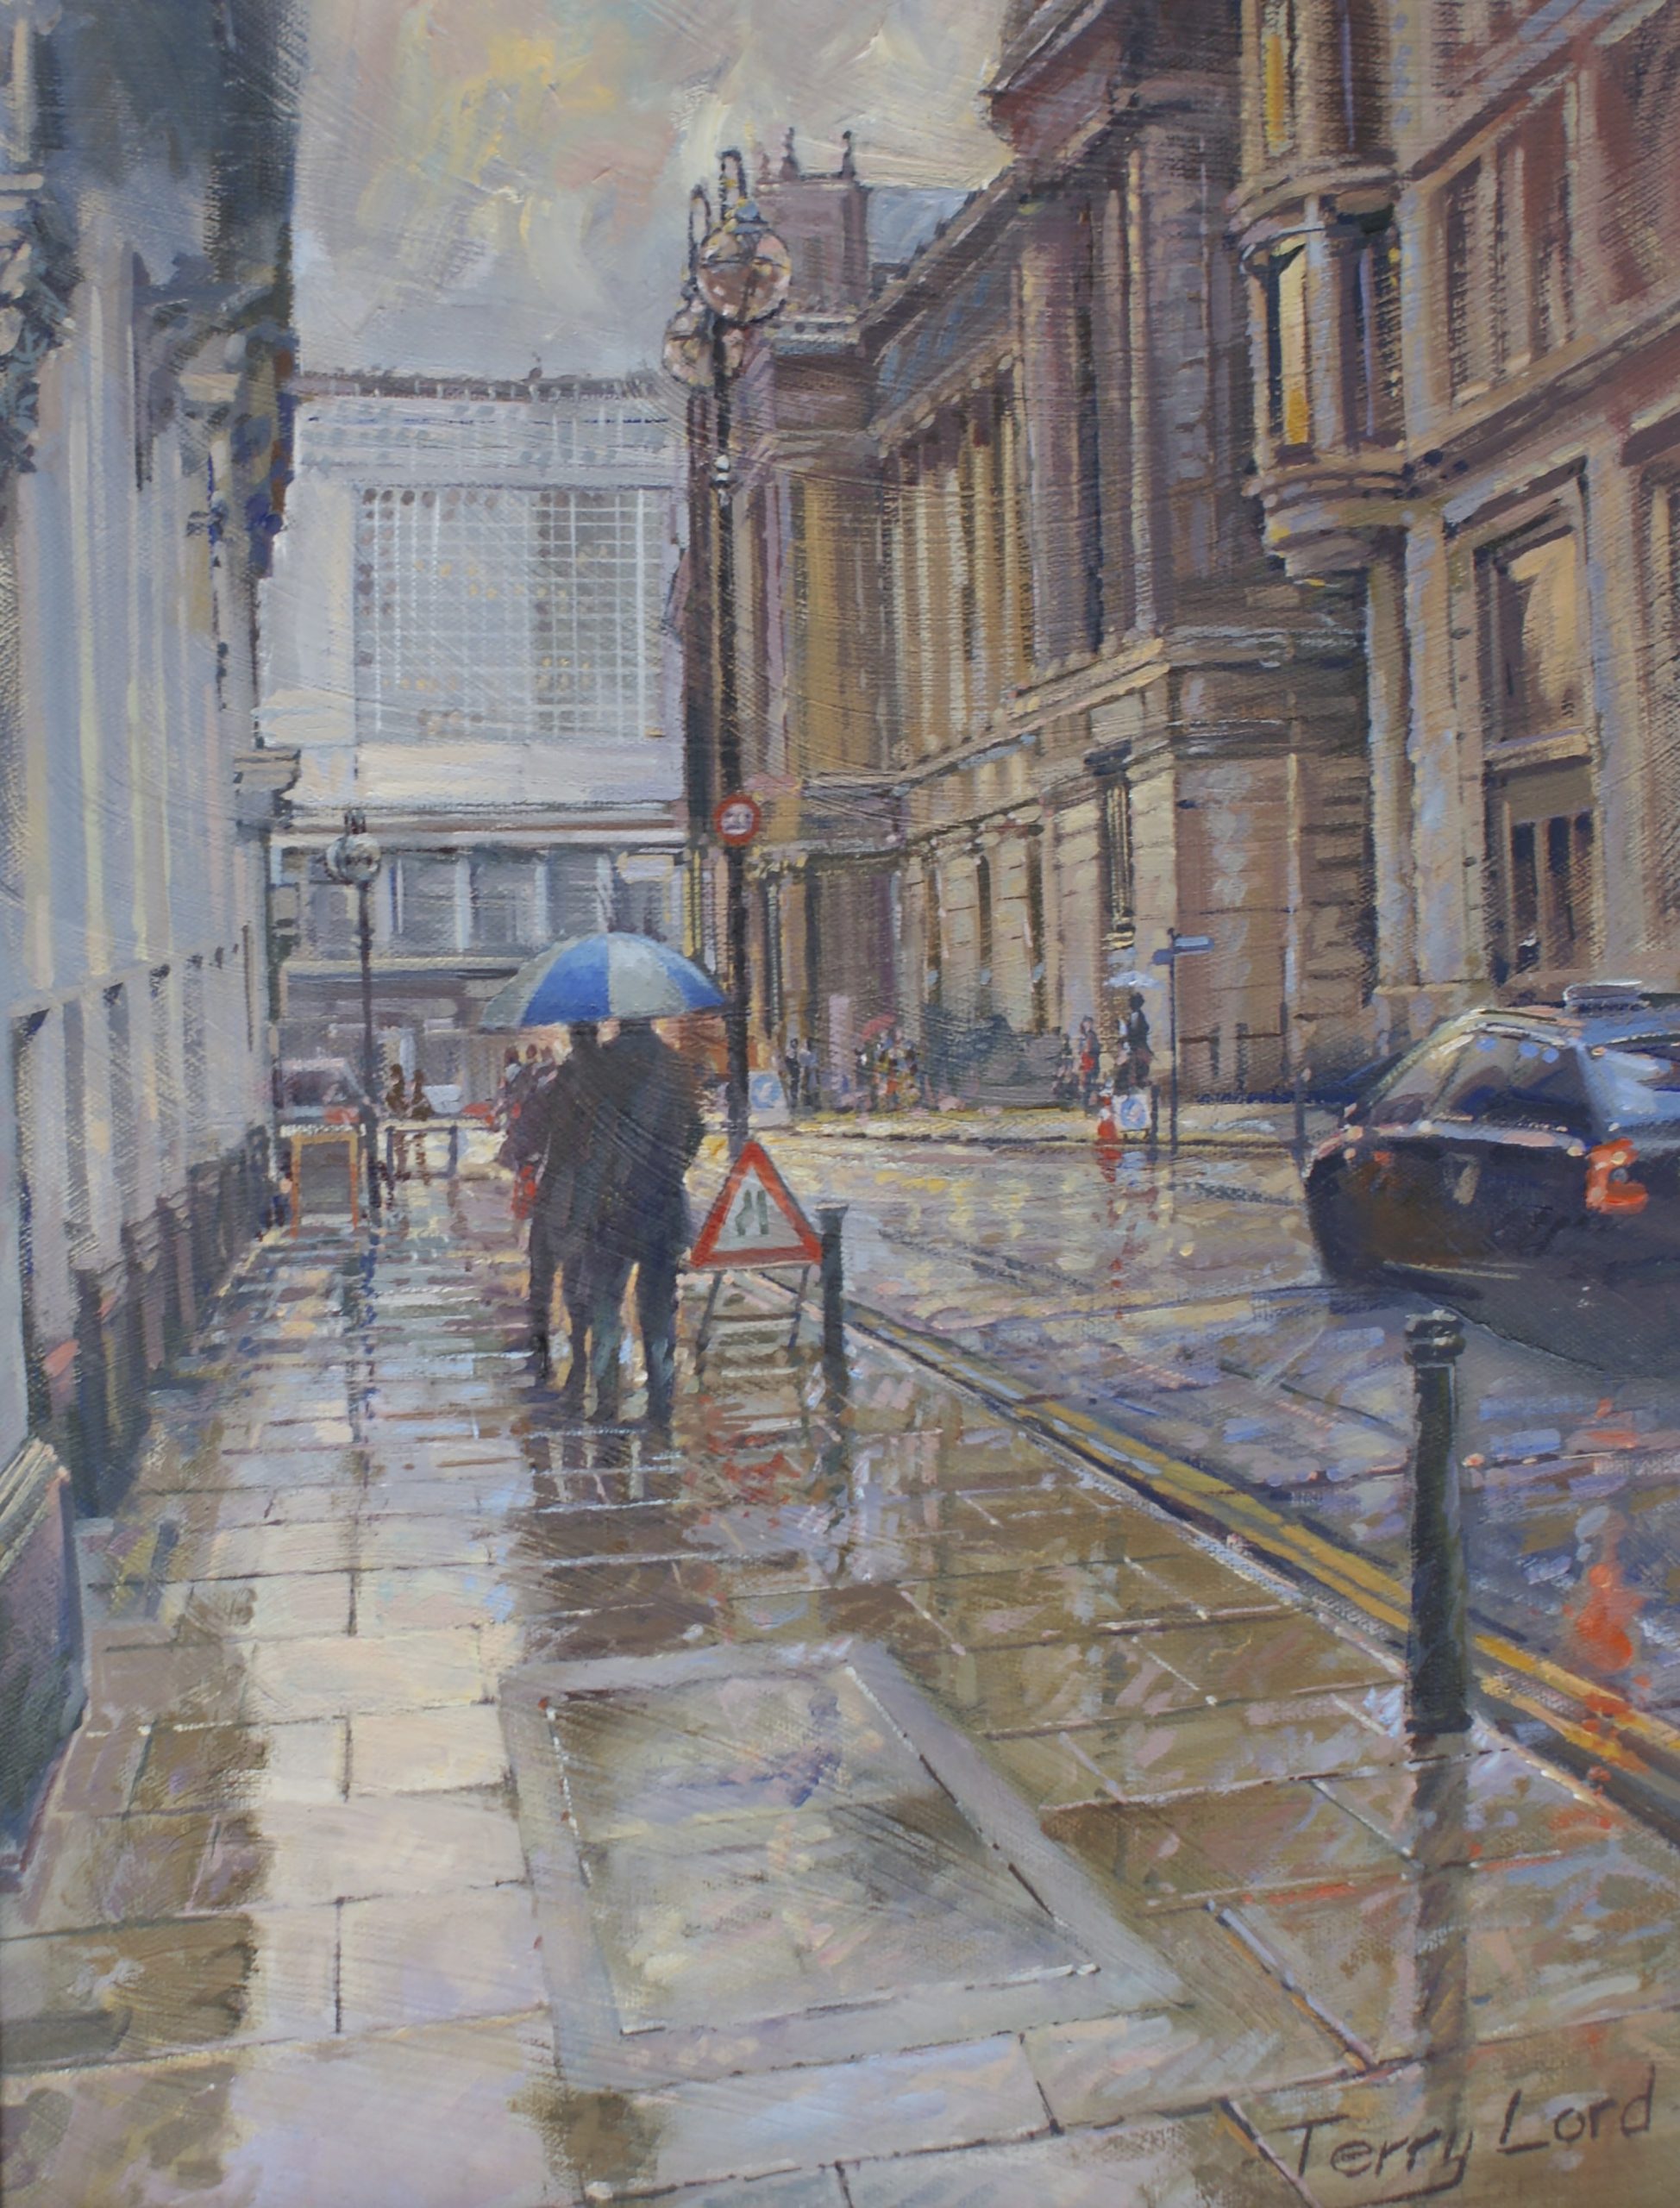 Painting of a rainy day in a city street with figures with umbrellas